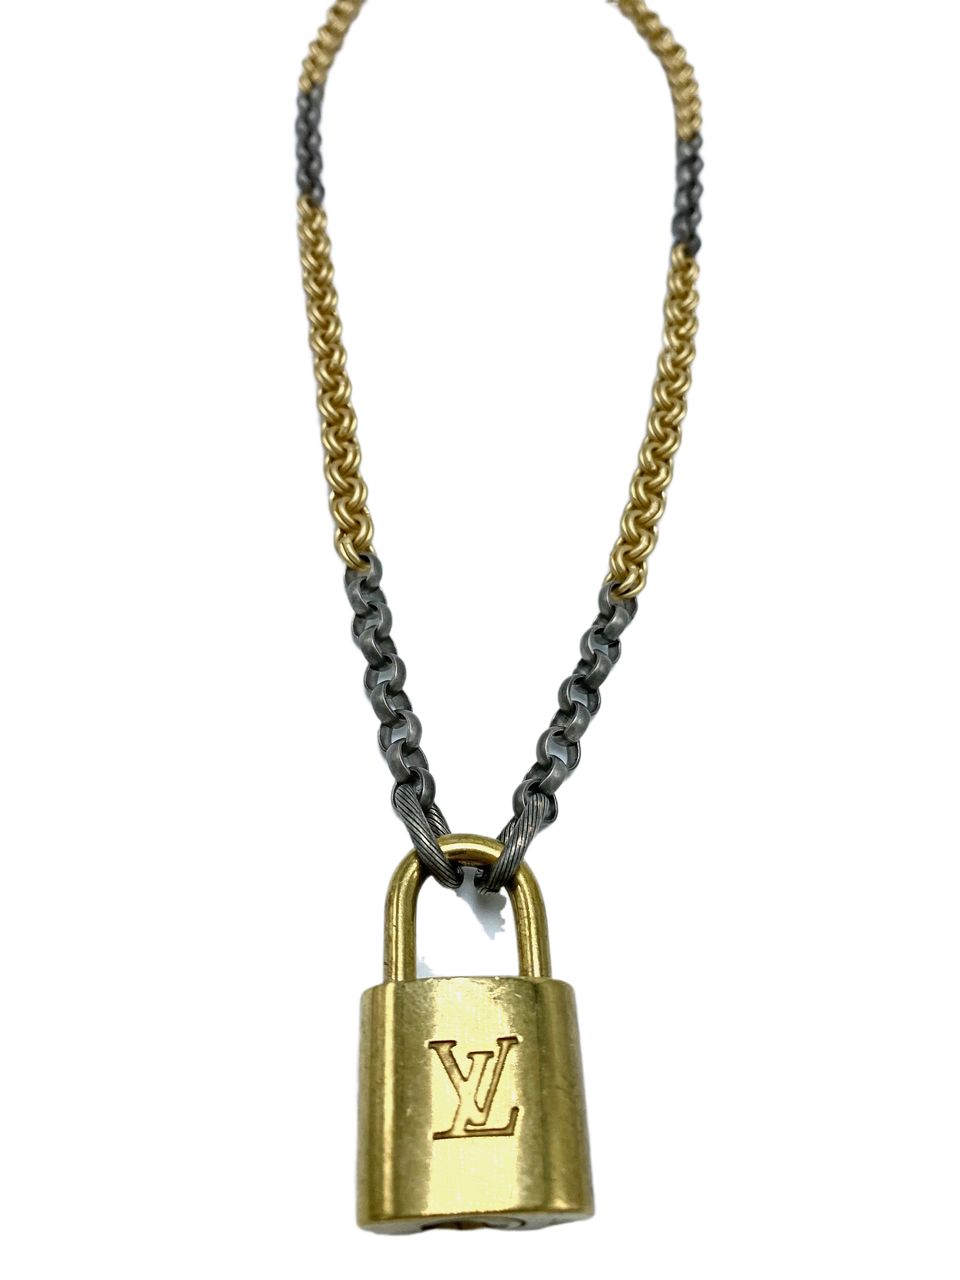 Silver and Gold Necklace with Vintage Lock Spinelli